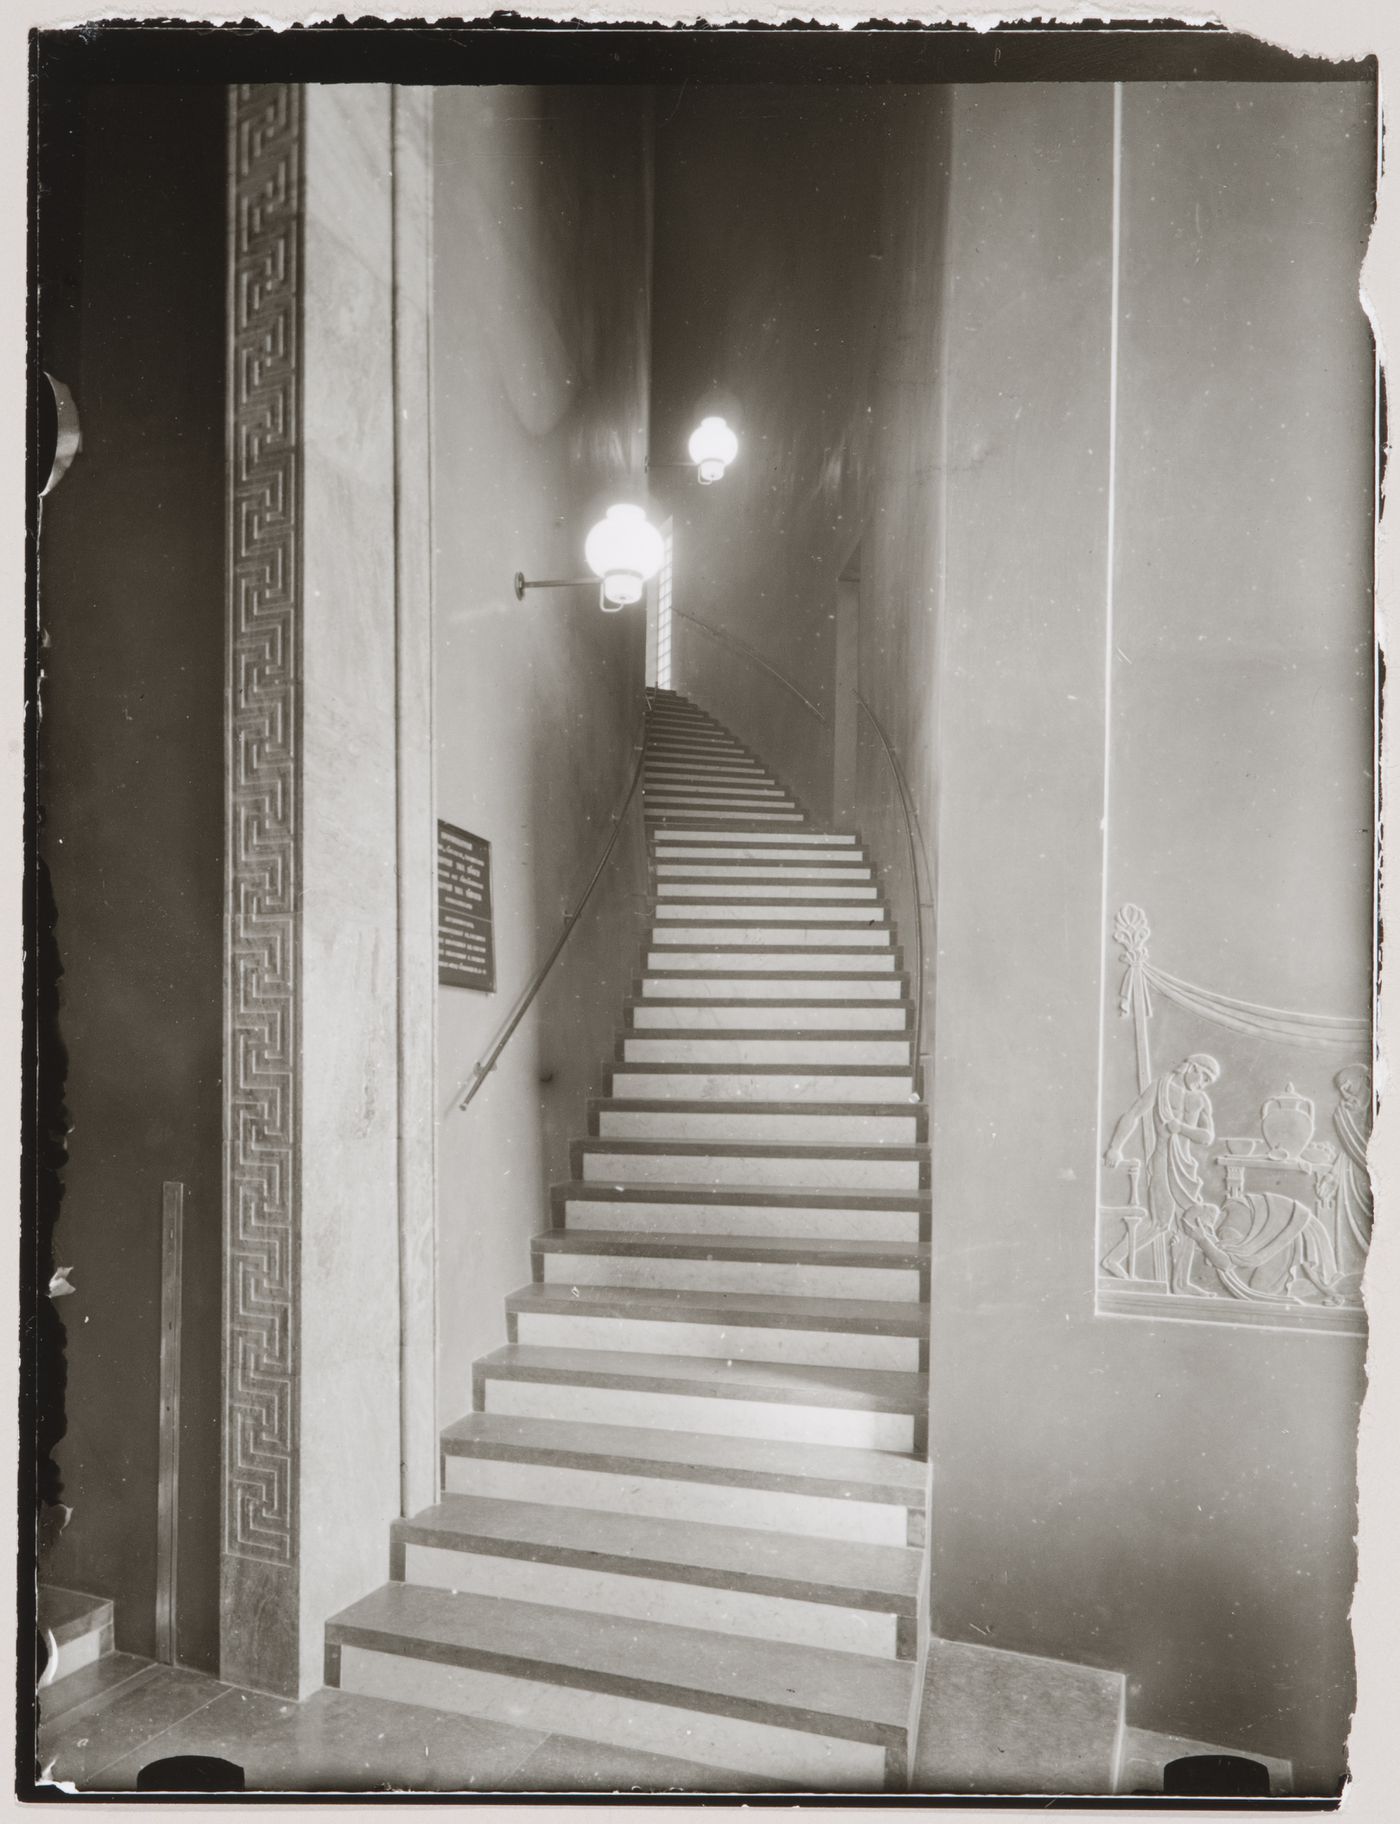 Interior view of the lobby of Stockholm Public Library showing the side stairs leading to the lending hall and a bas-relief depicting a scene from the Iliad sculpted by Ivar Viktor Johnsson, 51-55 Odengatan, Stockholm